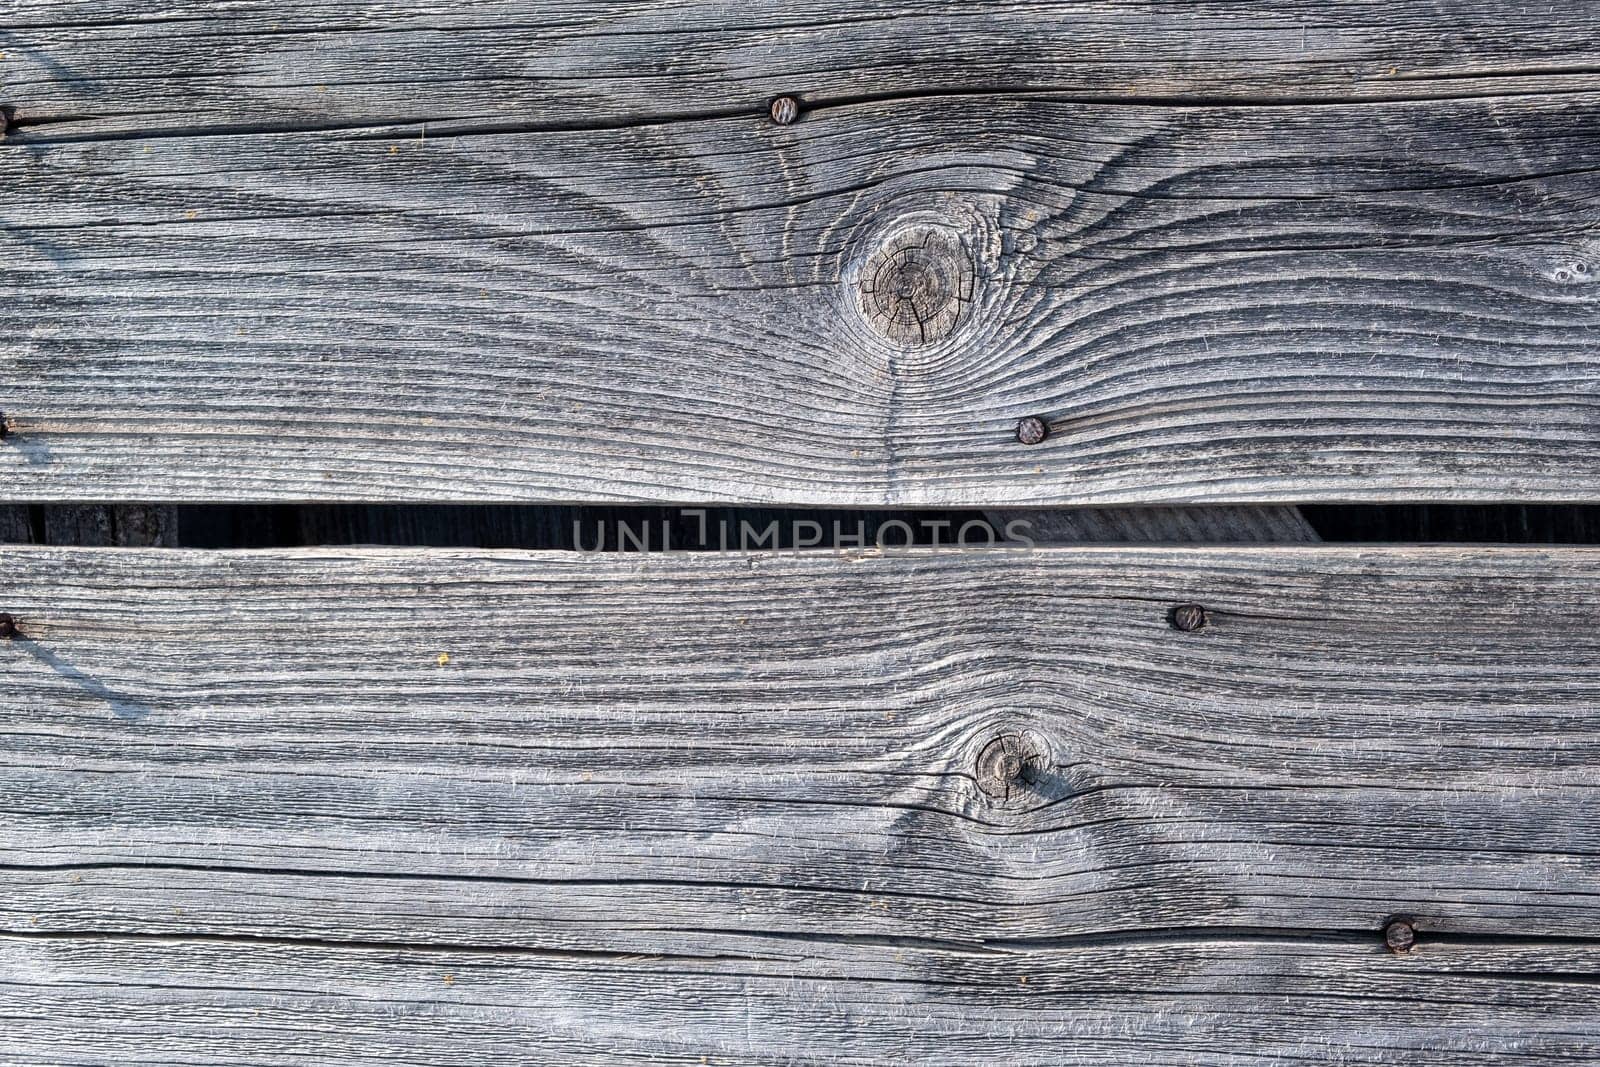 Elements of the walls of a wooden old village house. Wooden Log cabin walls texture. Weathered surface of an old wooden log house close-up. Old wooden log building in winter close-up.